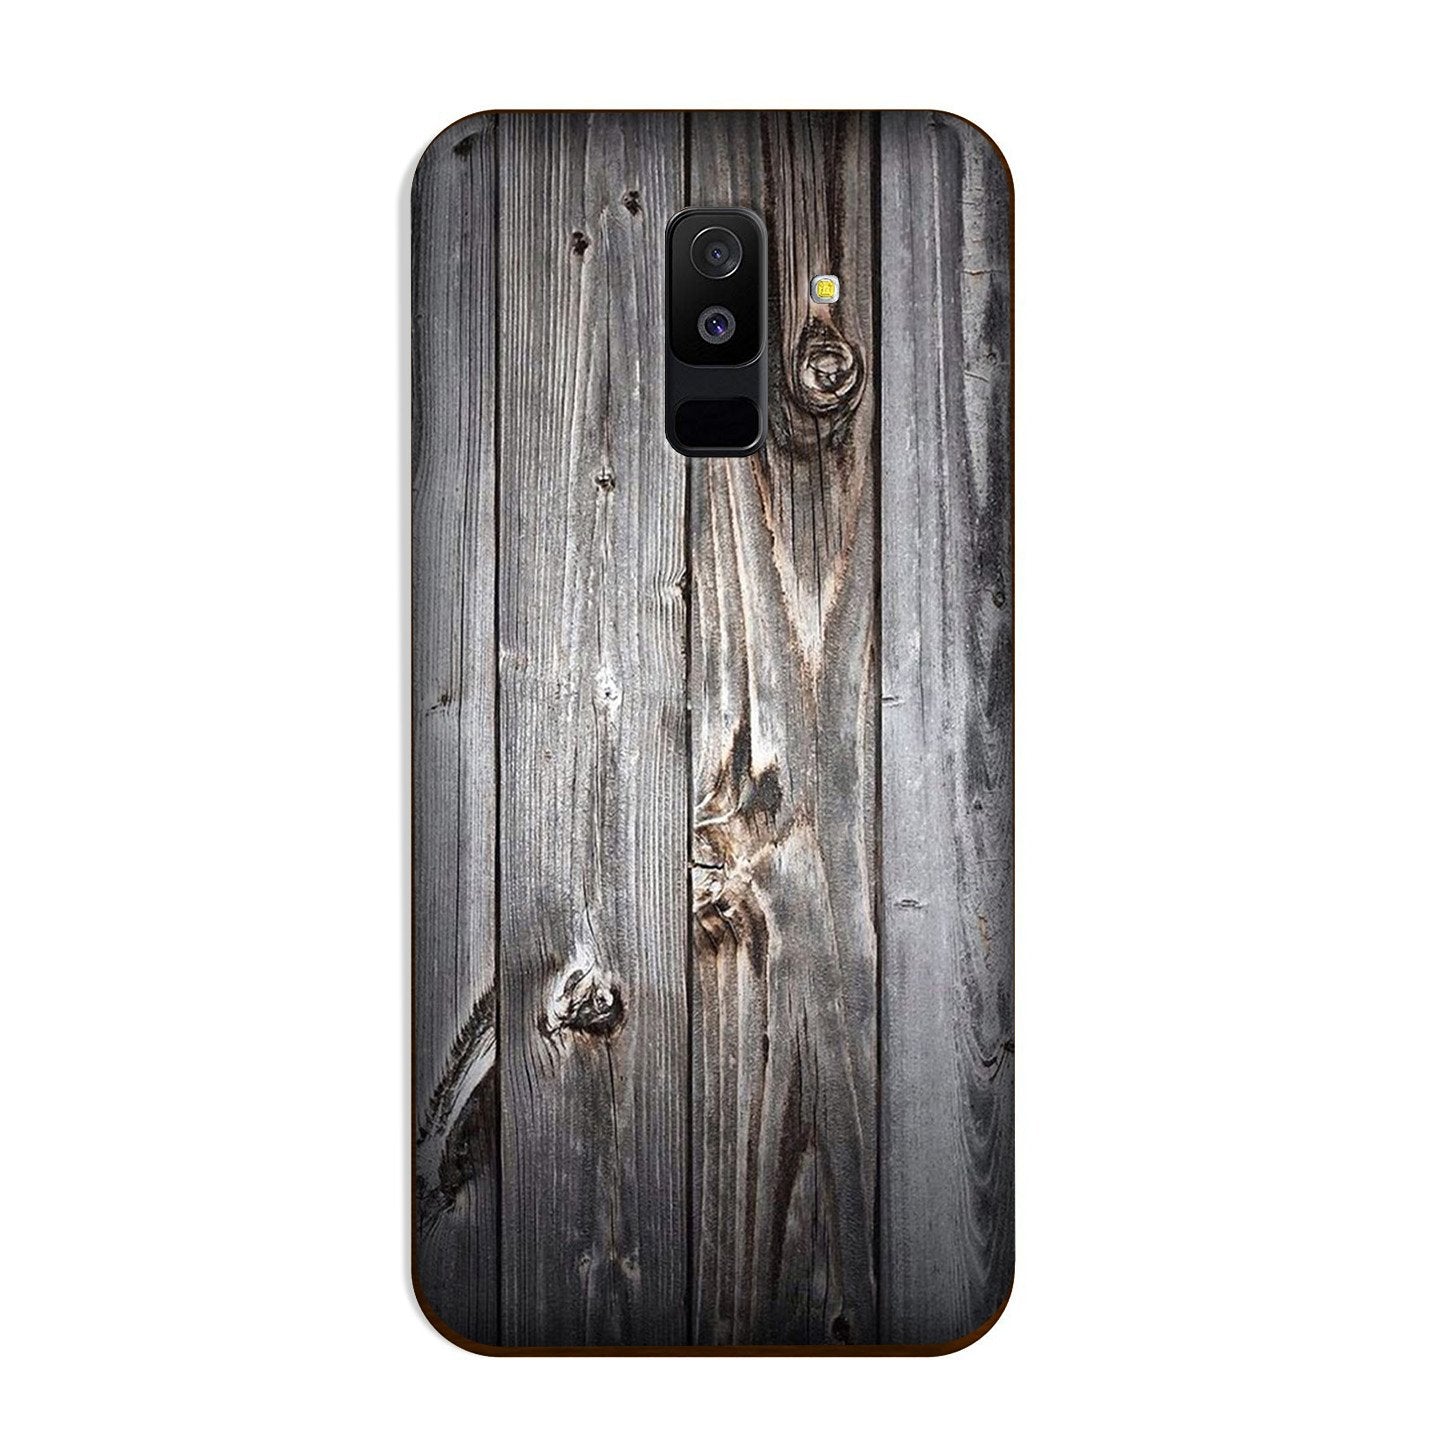 Wooden Look Case for Galaxy J8  (Design - 114)